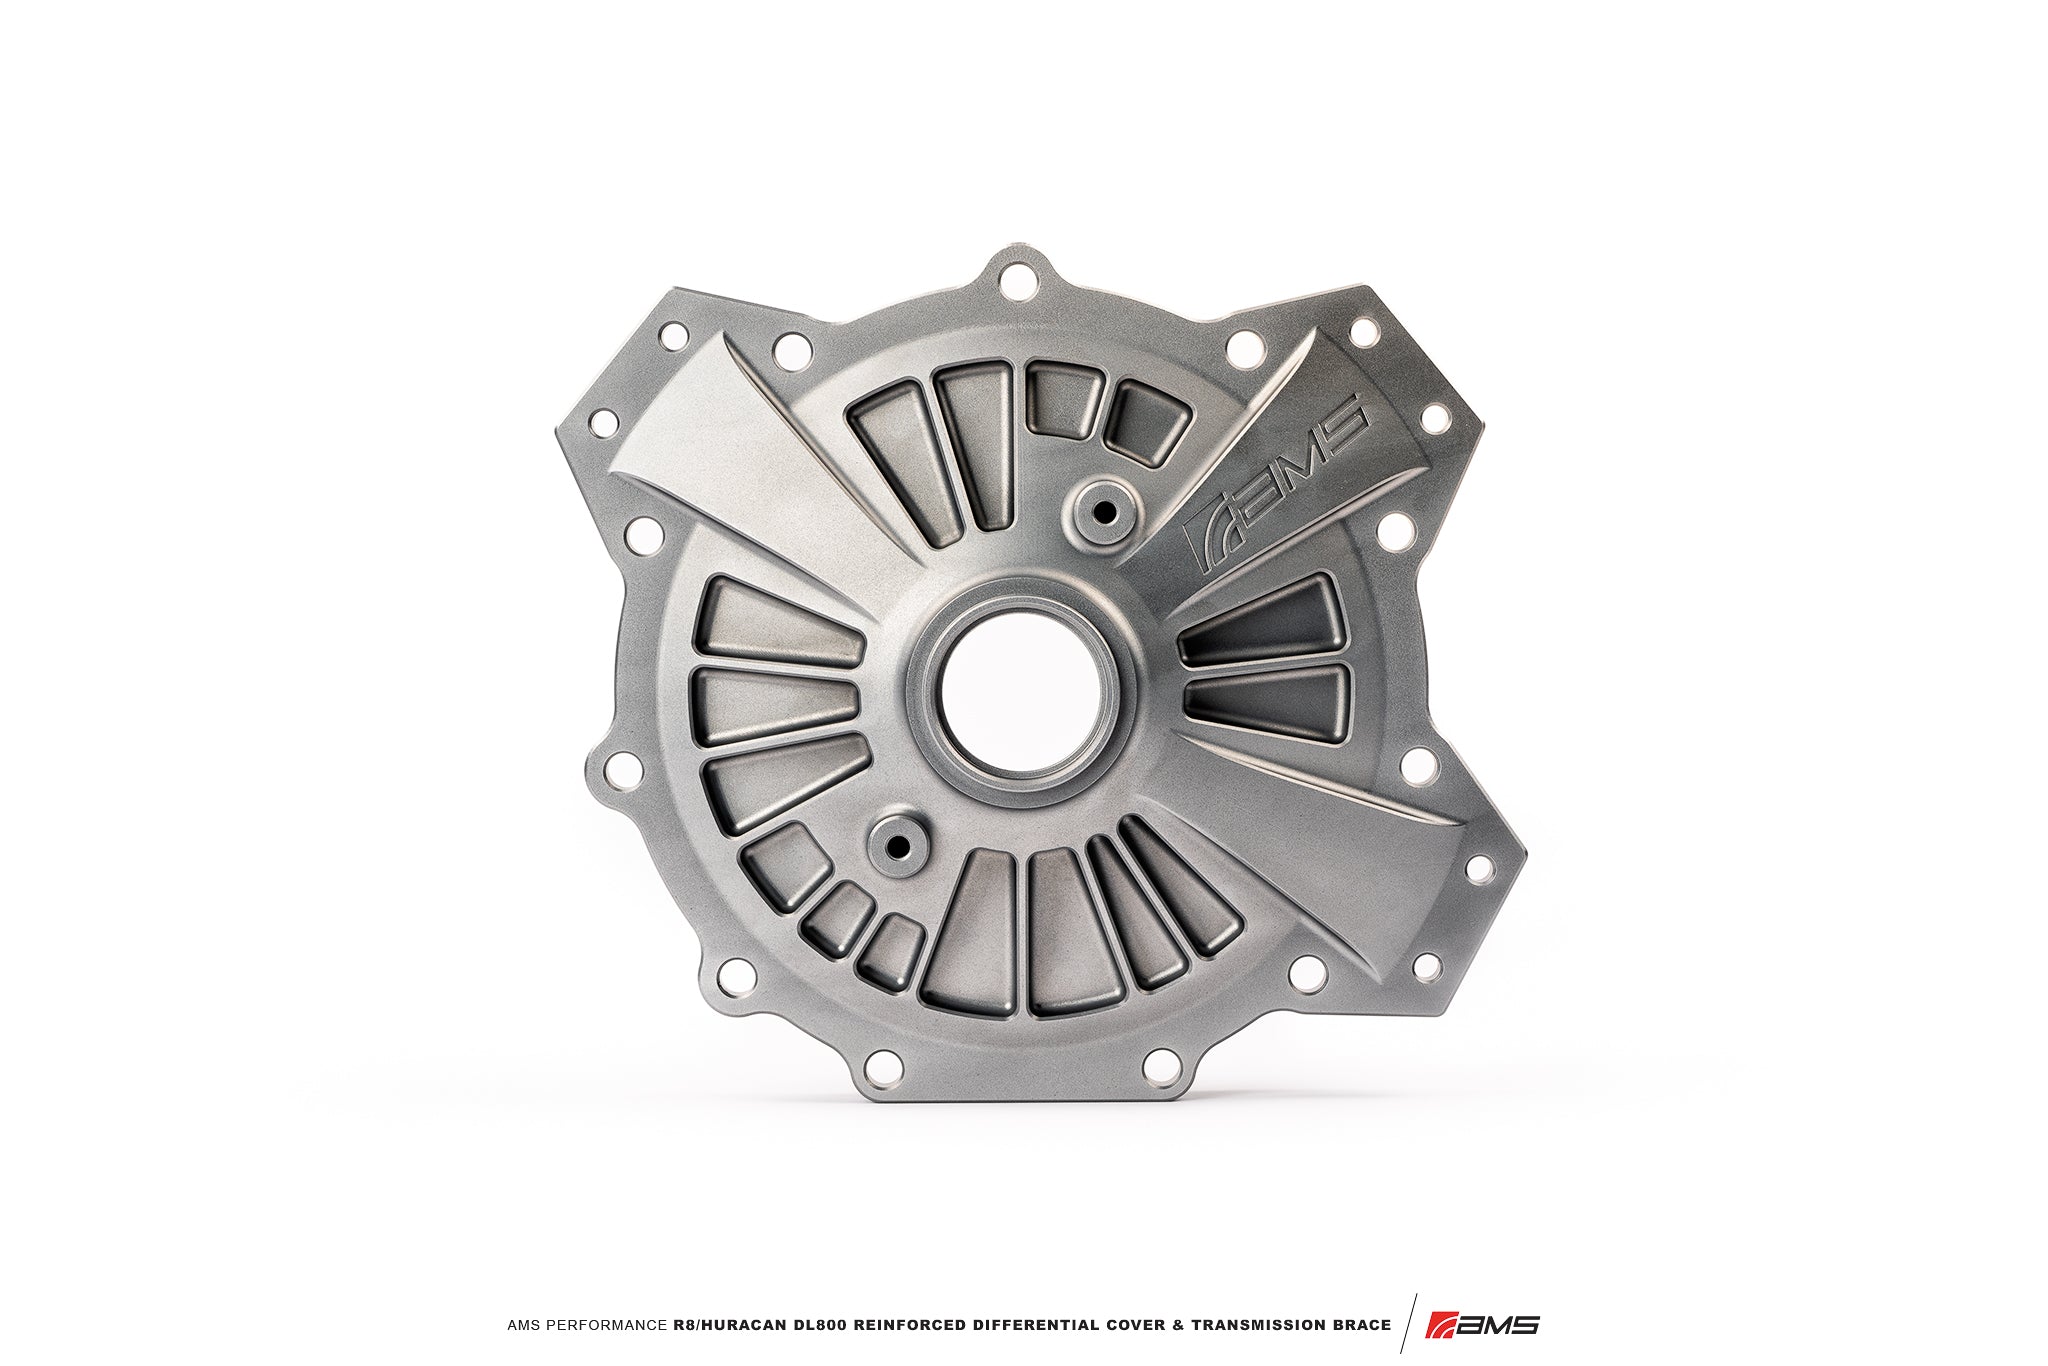 AMS PERFORMANCE R8/HURACAN DL800 REINFORCED DIFFERENTIAL COVER & TRANSMISSION BRACE